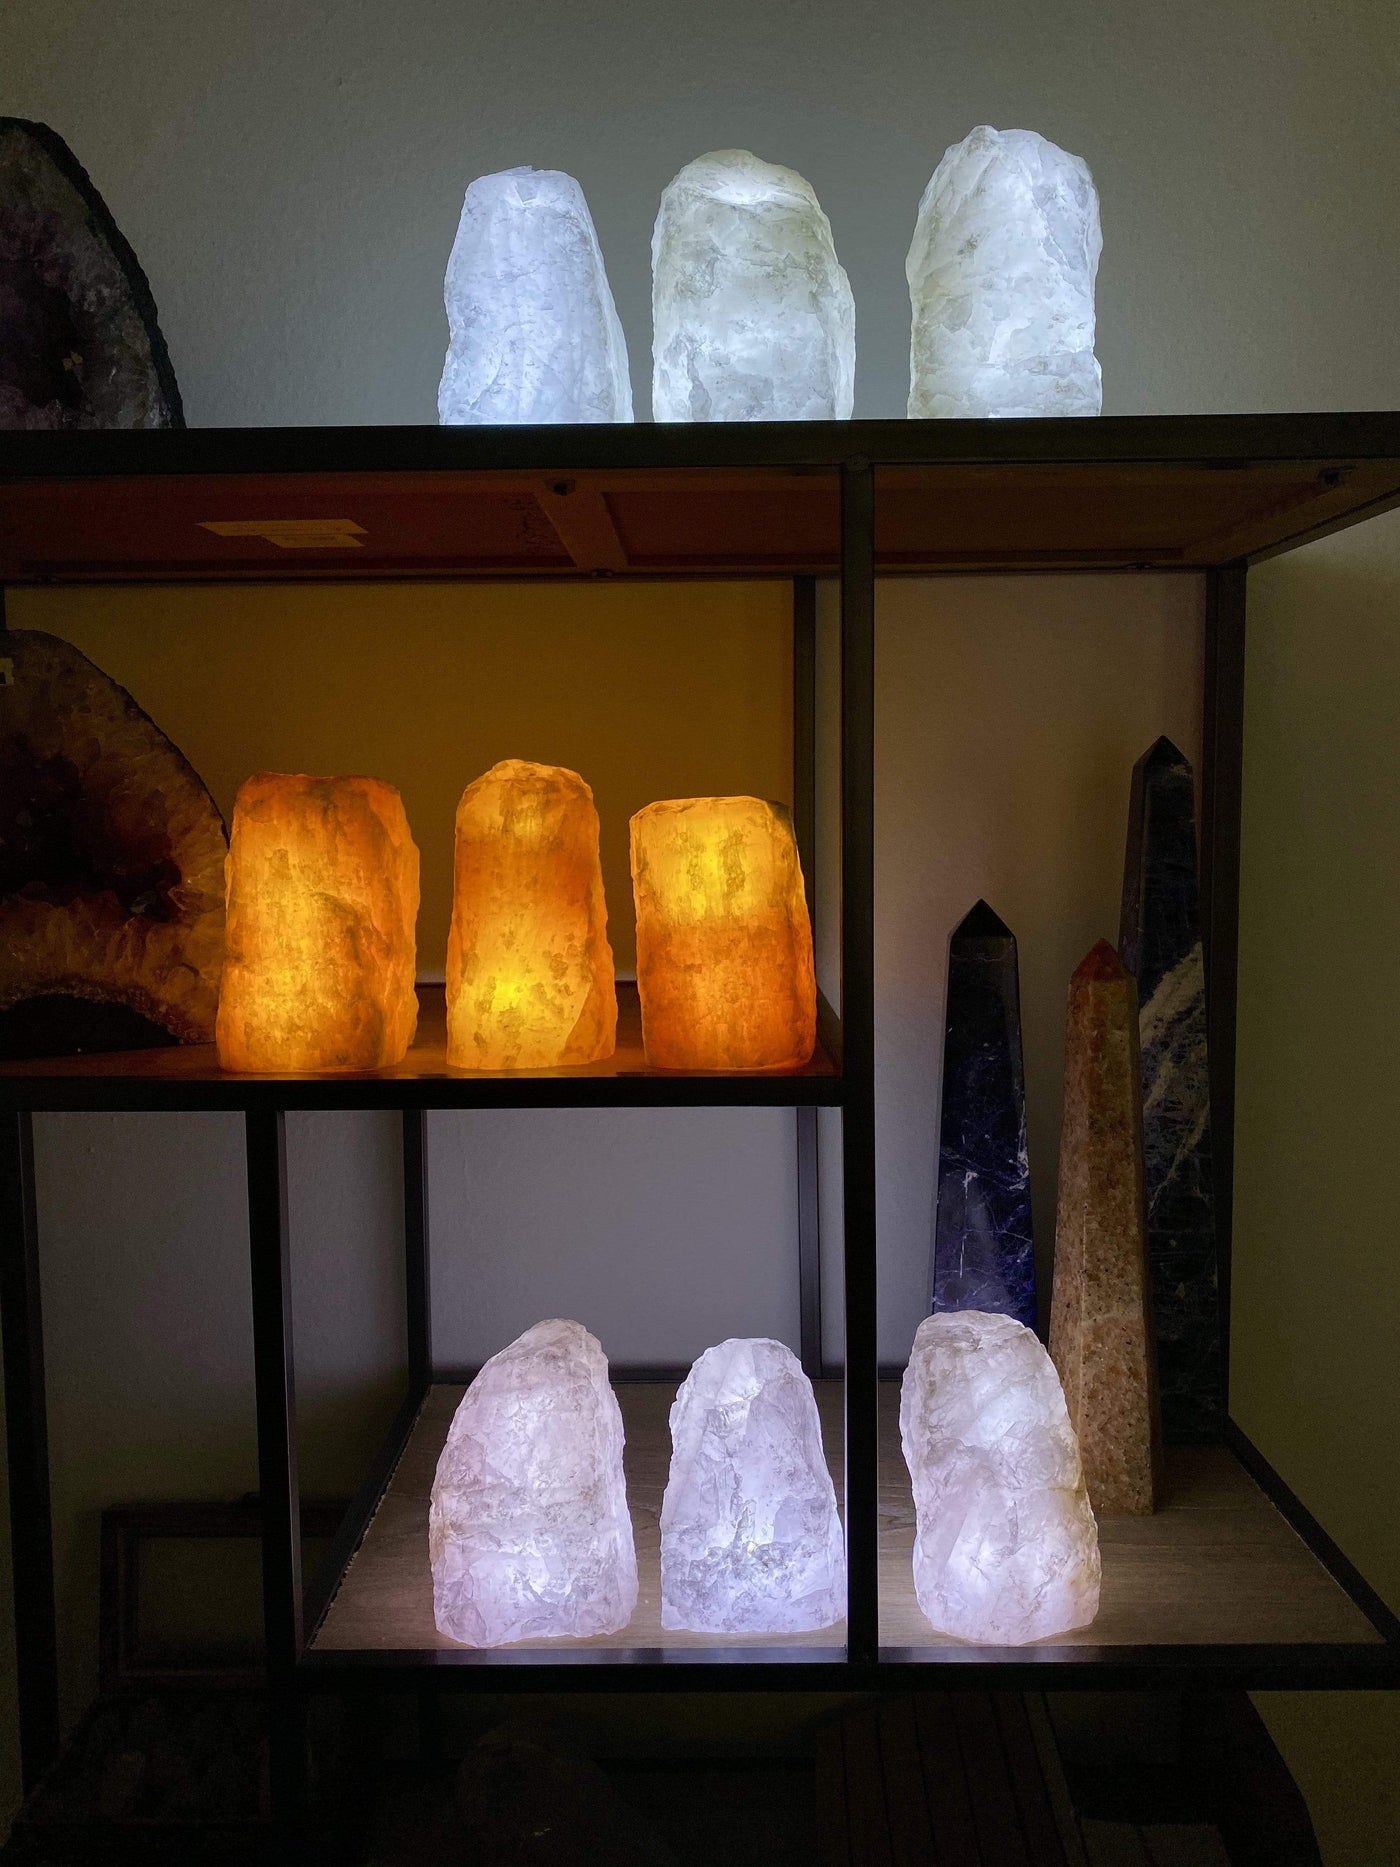 6 Rough Stone Lamps in groups of 3 lit up in a dark room with other crystals